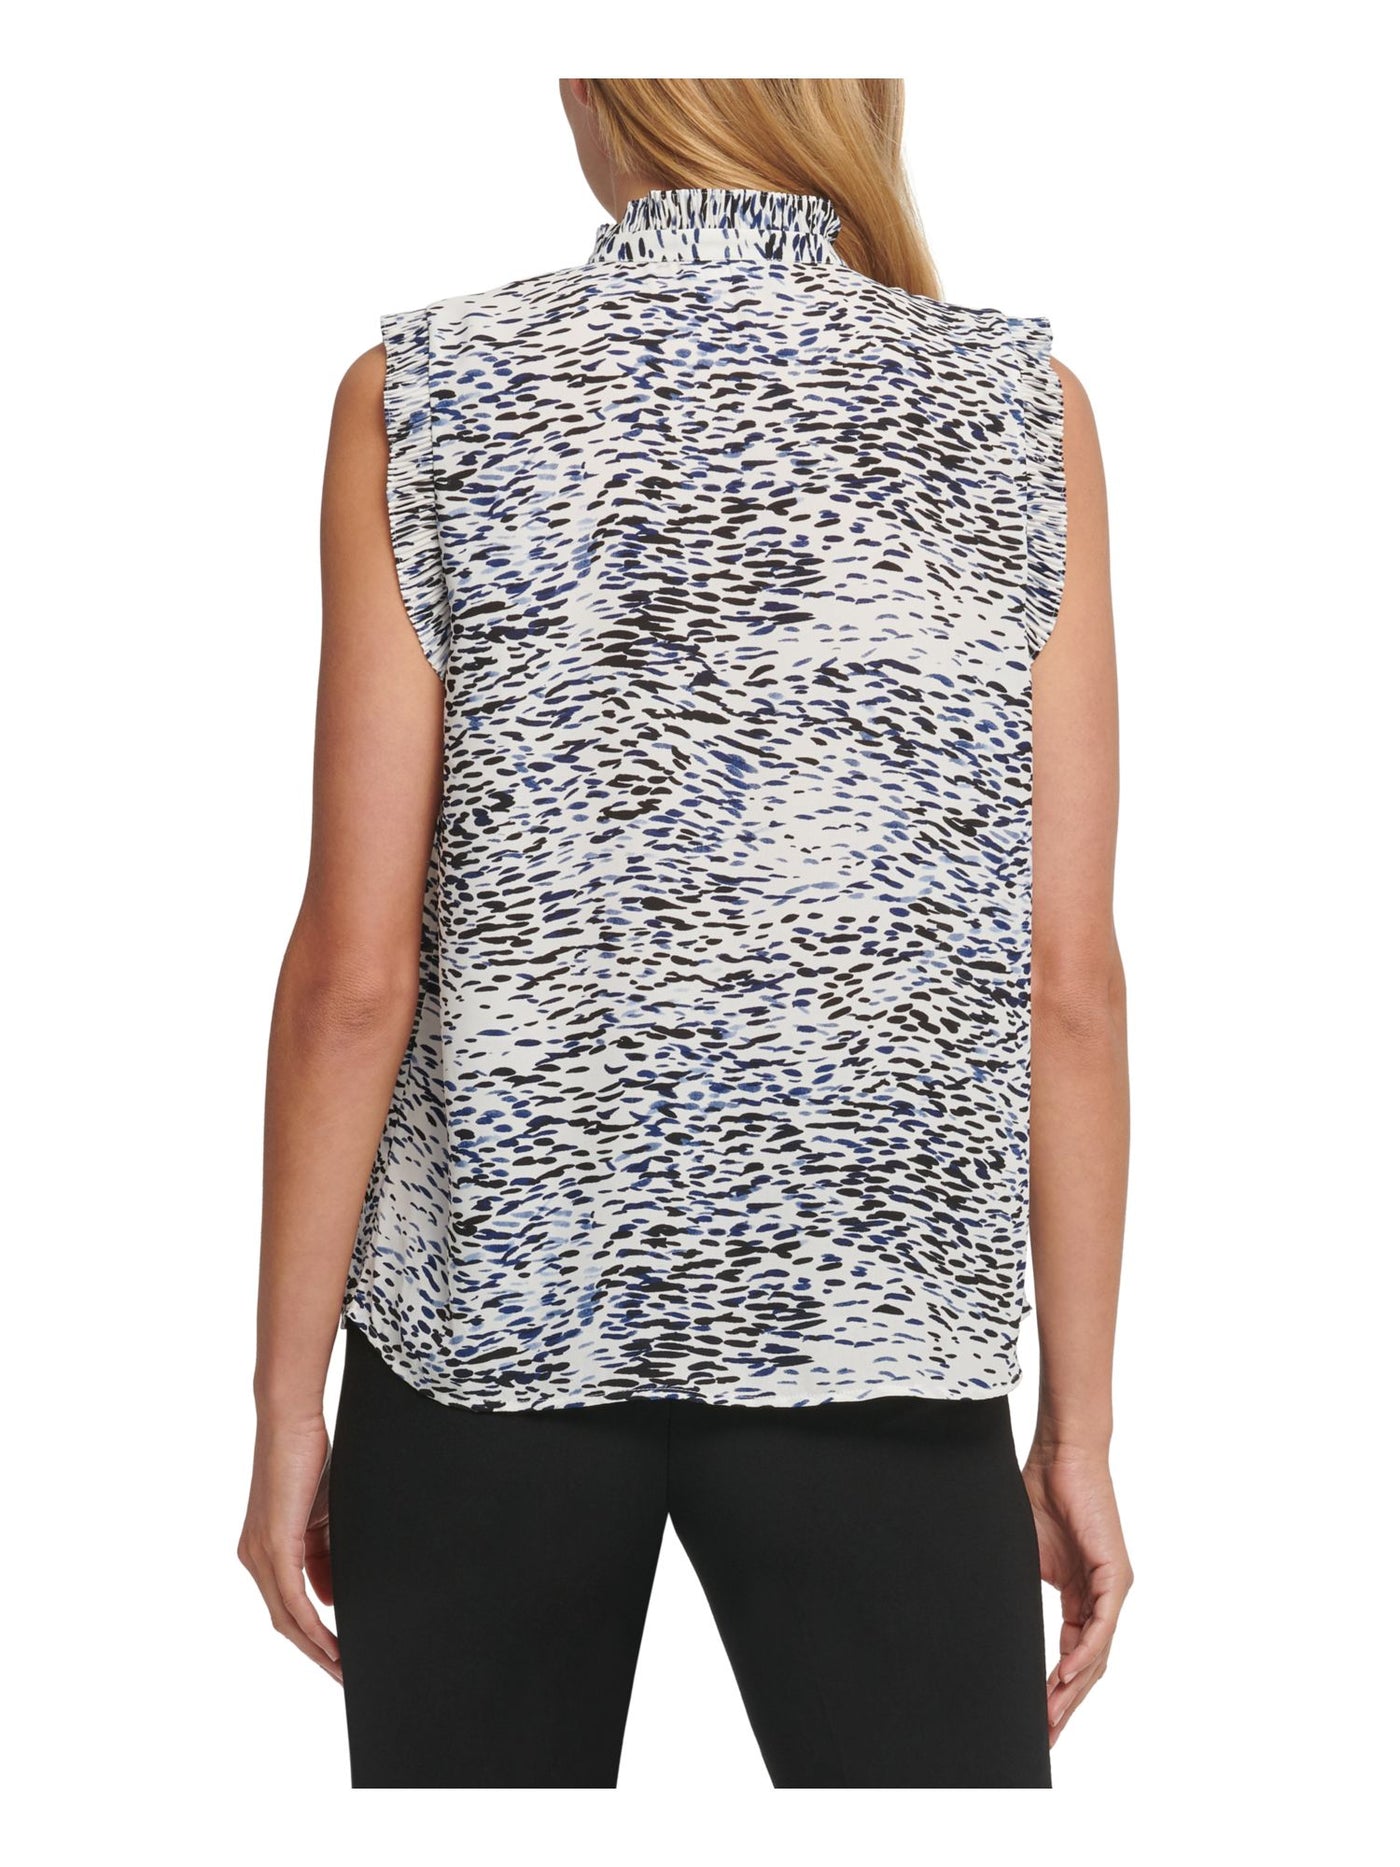 DKNY Womens Blue Tie Pleated At Neckline And Armholes Printed Sleeveless Split Blouse S